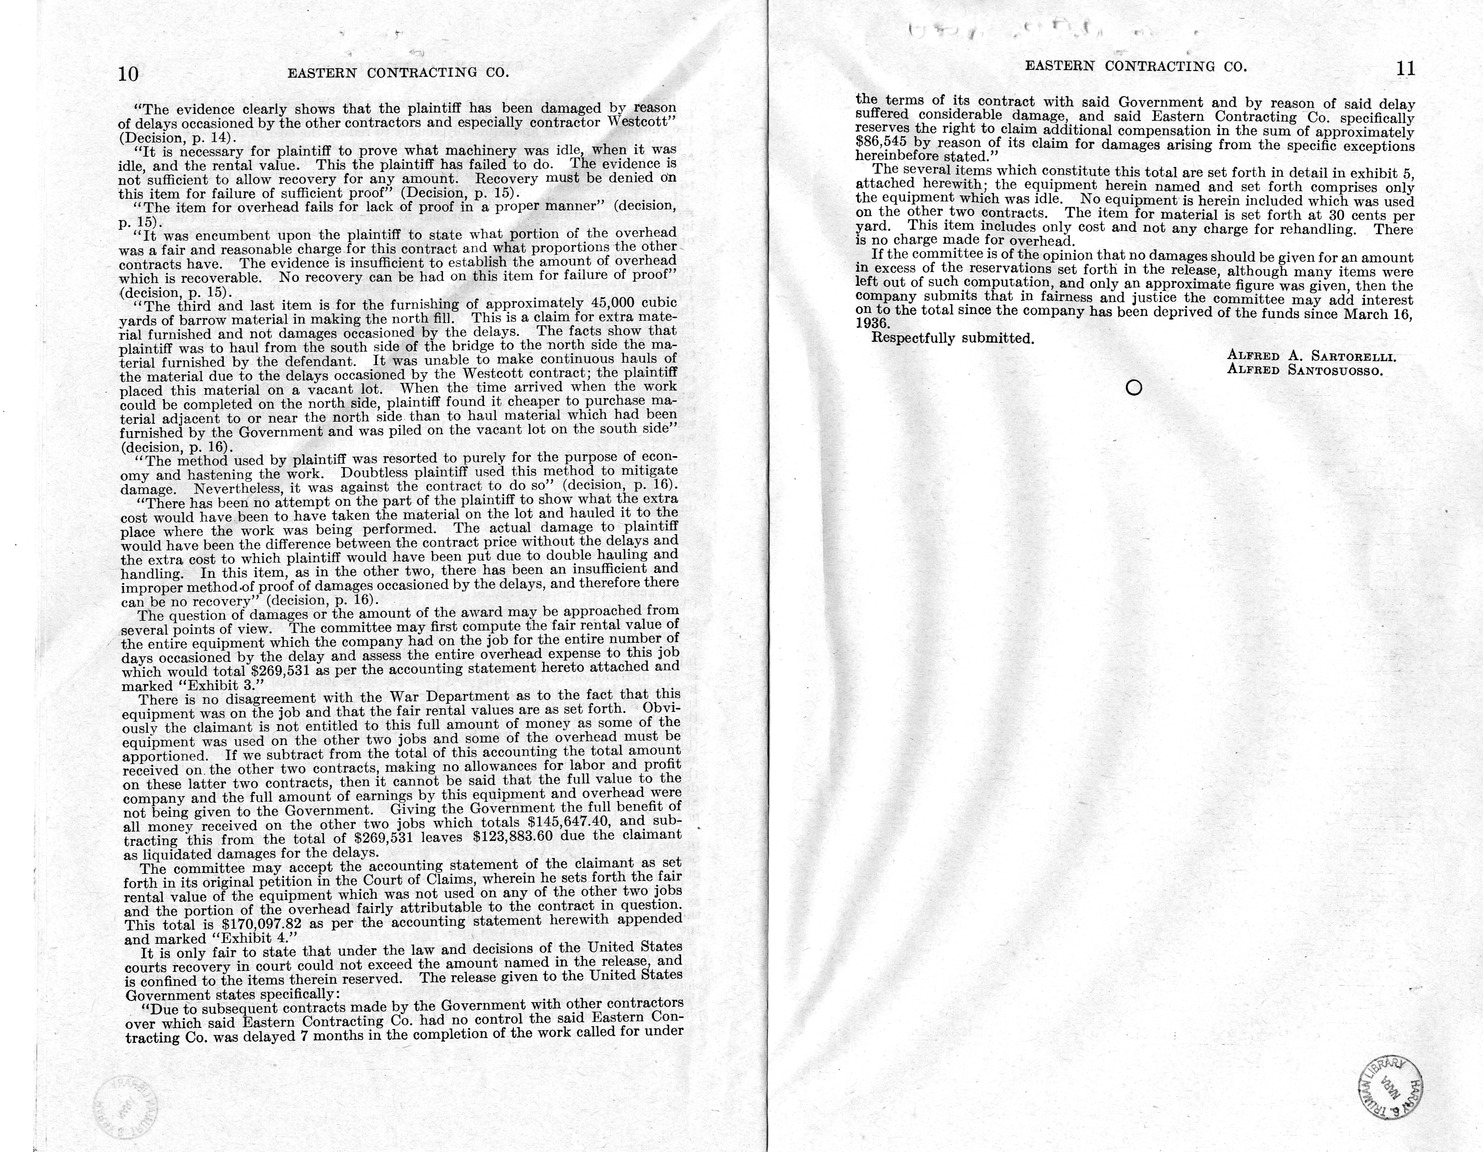 Memorandum from Frederick J. Bailey to M. C. Latta, H.R. 2518, To Confer Jurisdiction Upon the Court of Claims to Hear, Determine, and Render Judgment Upon a Certain Claim of Eastern Contracting Company, A Corporation, Against the United States, with Attachments